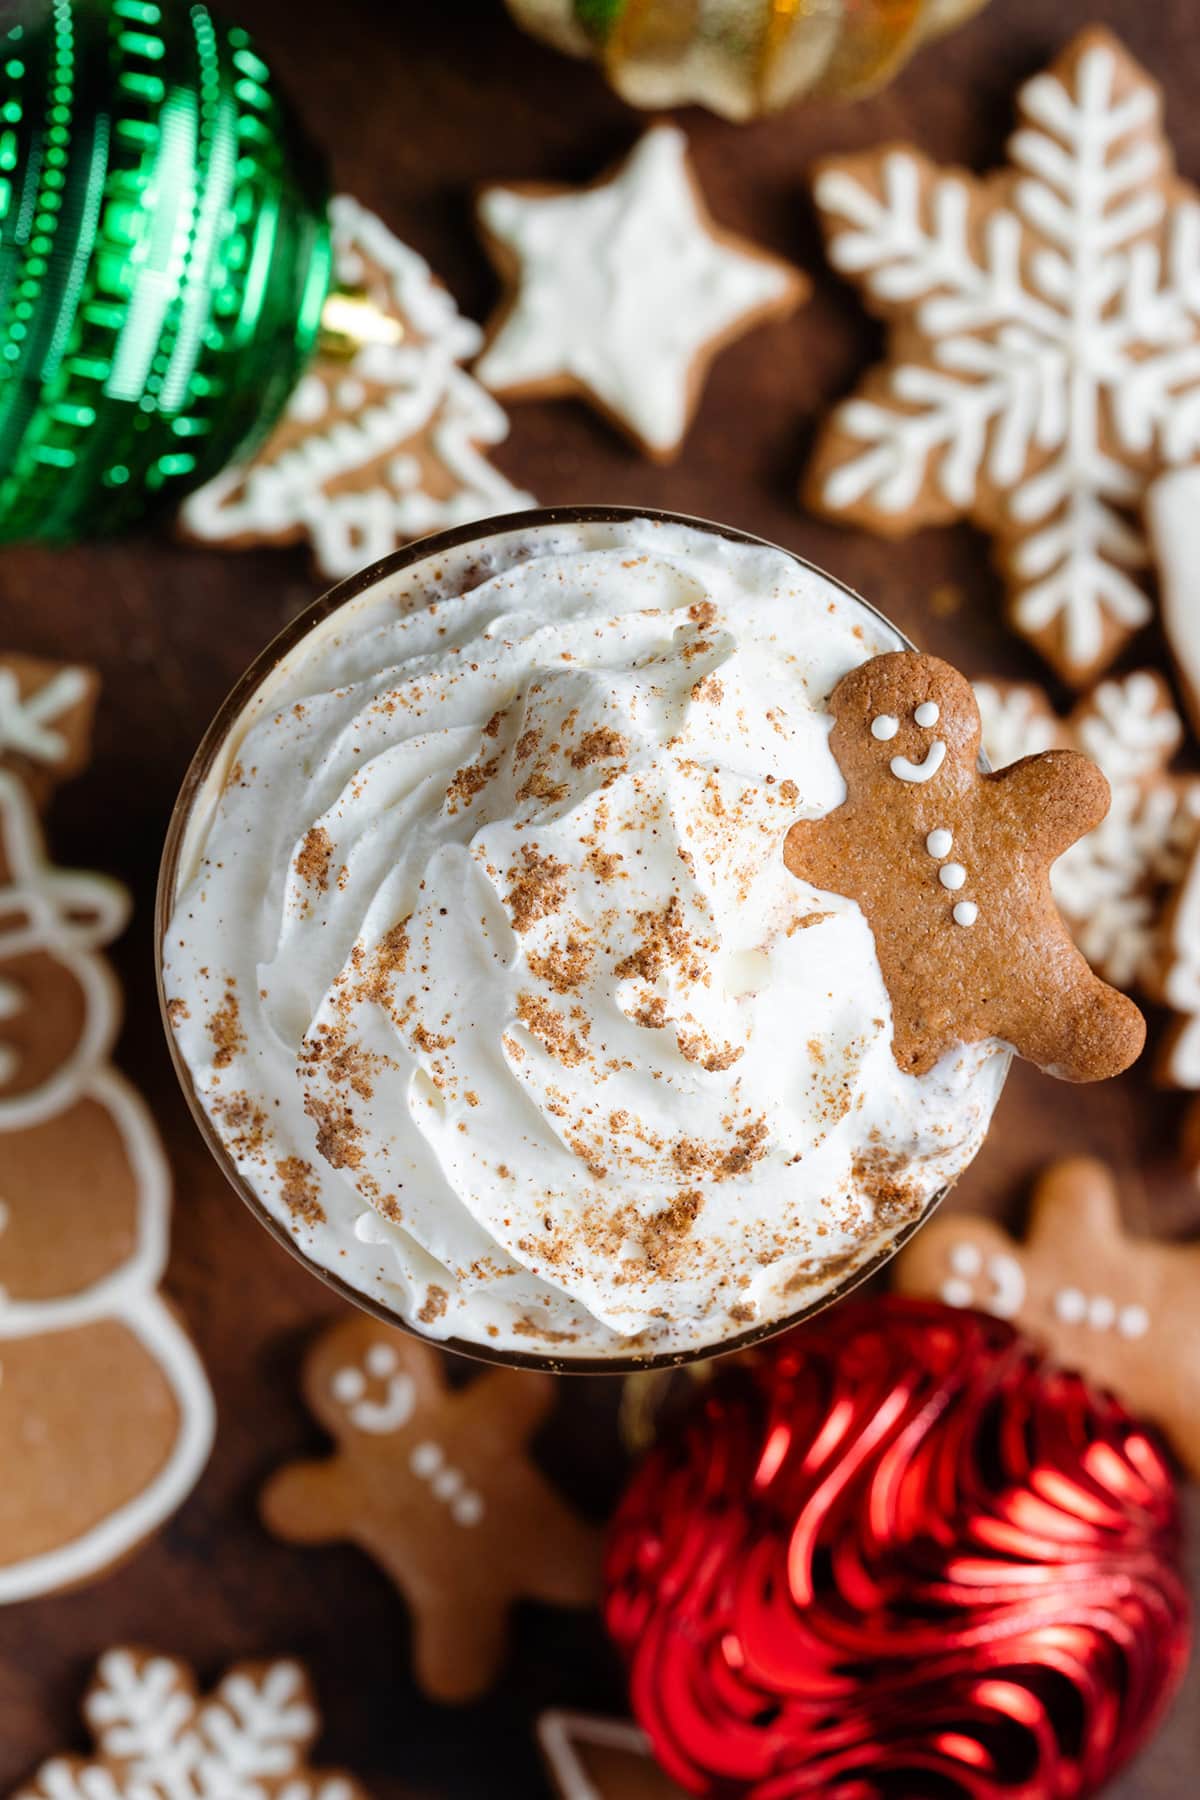 A glass with iced latte topped with a generous amount of whipped cream, gingerbread spice, and a small gingerbread cookie.